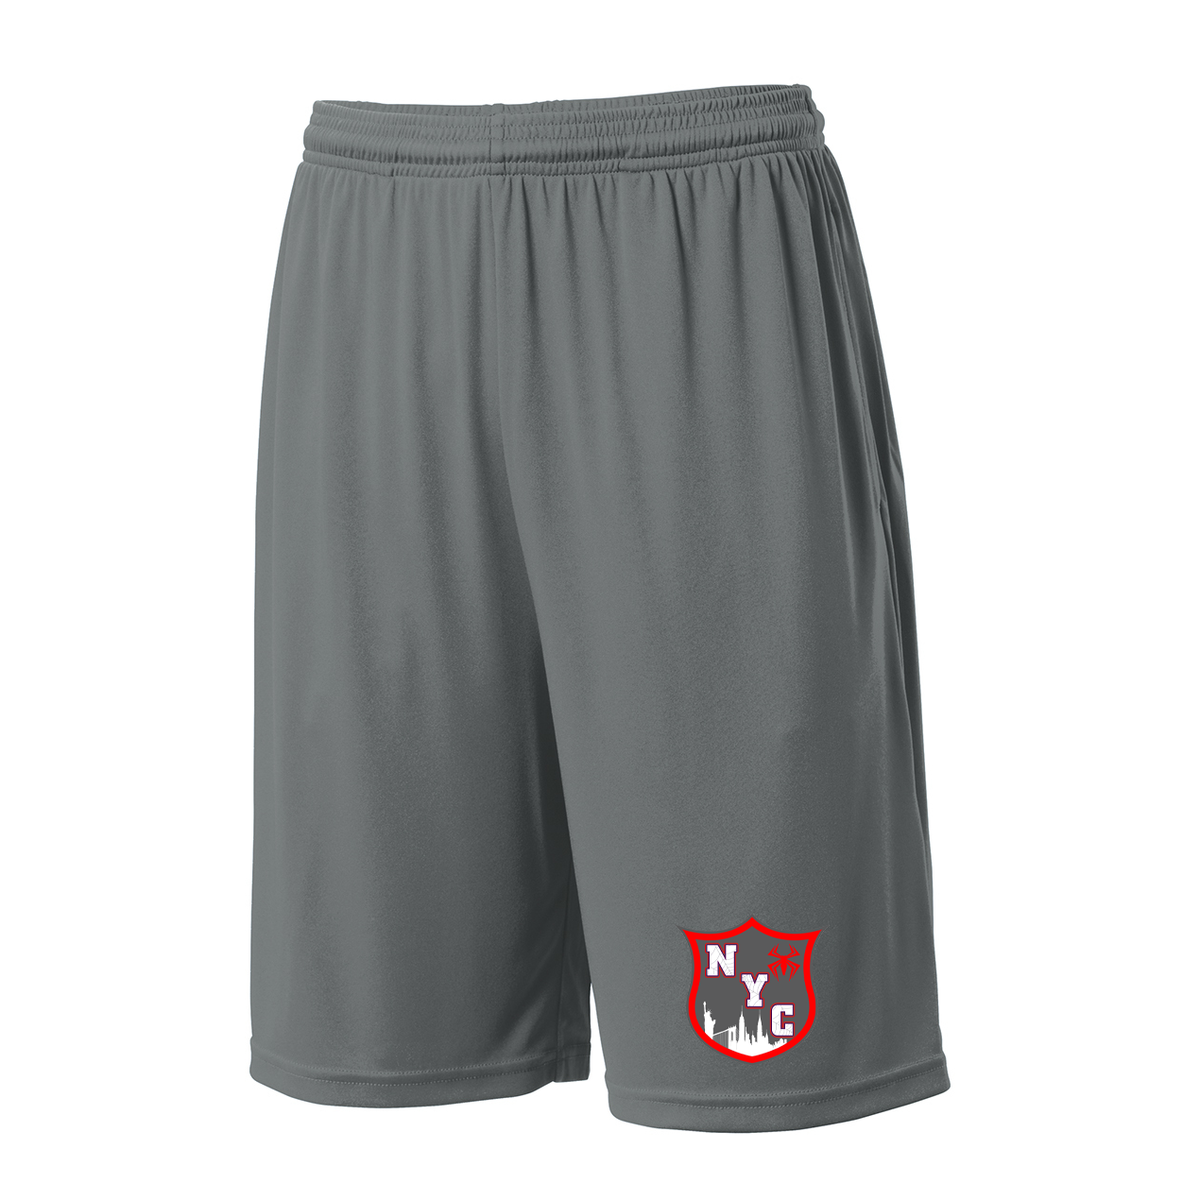 Spiders Lacrosse Shorts